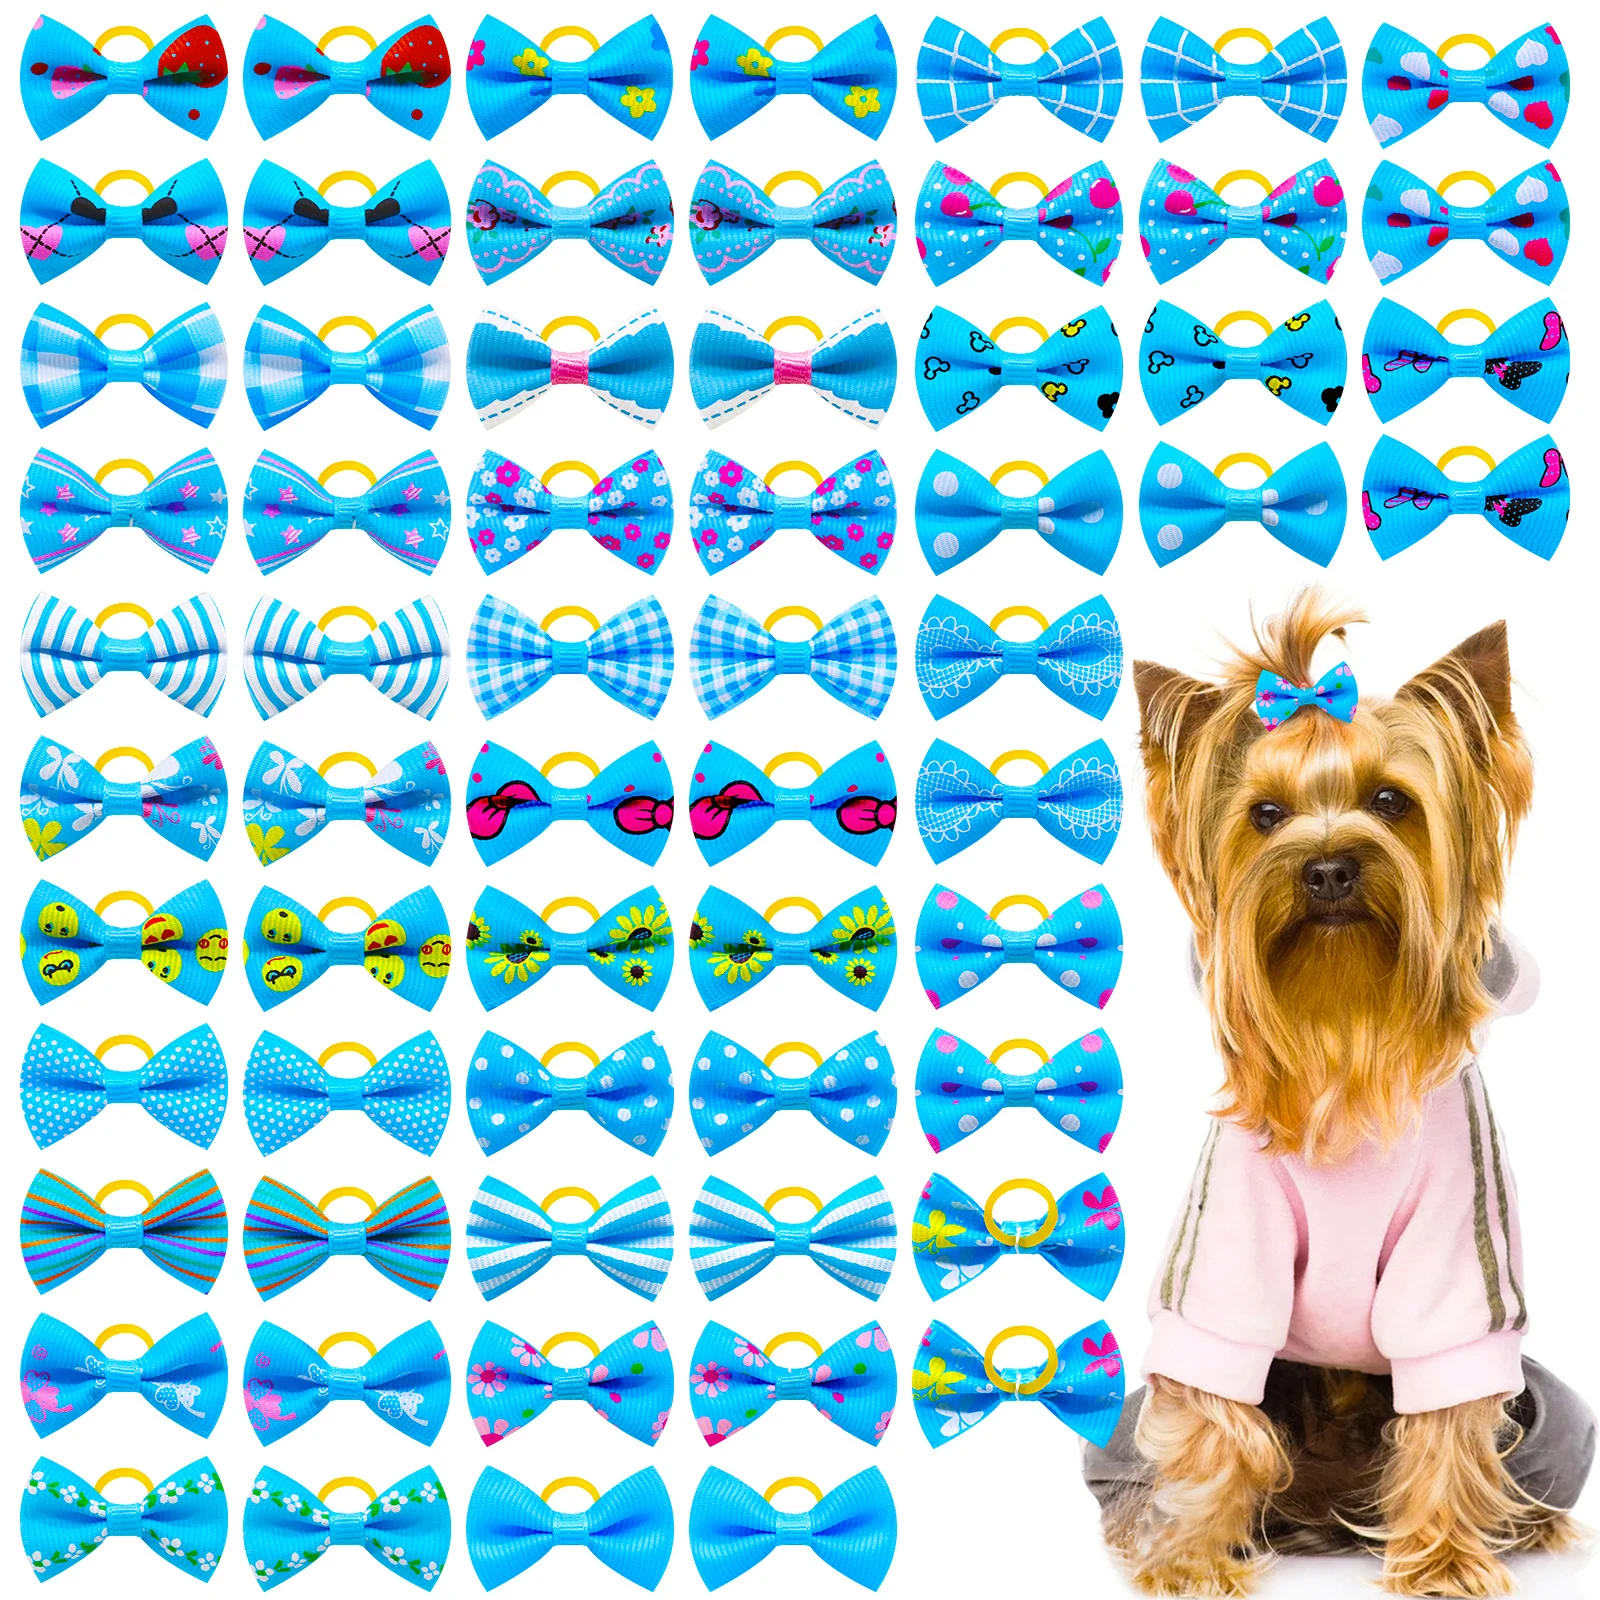 

100/200pcs Dog Bows For Small Dog Bowknot Cute Pet Dog Hair Bows For Smll Dogs Hair Accessories Pet Supplies For Small Dogs Cats